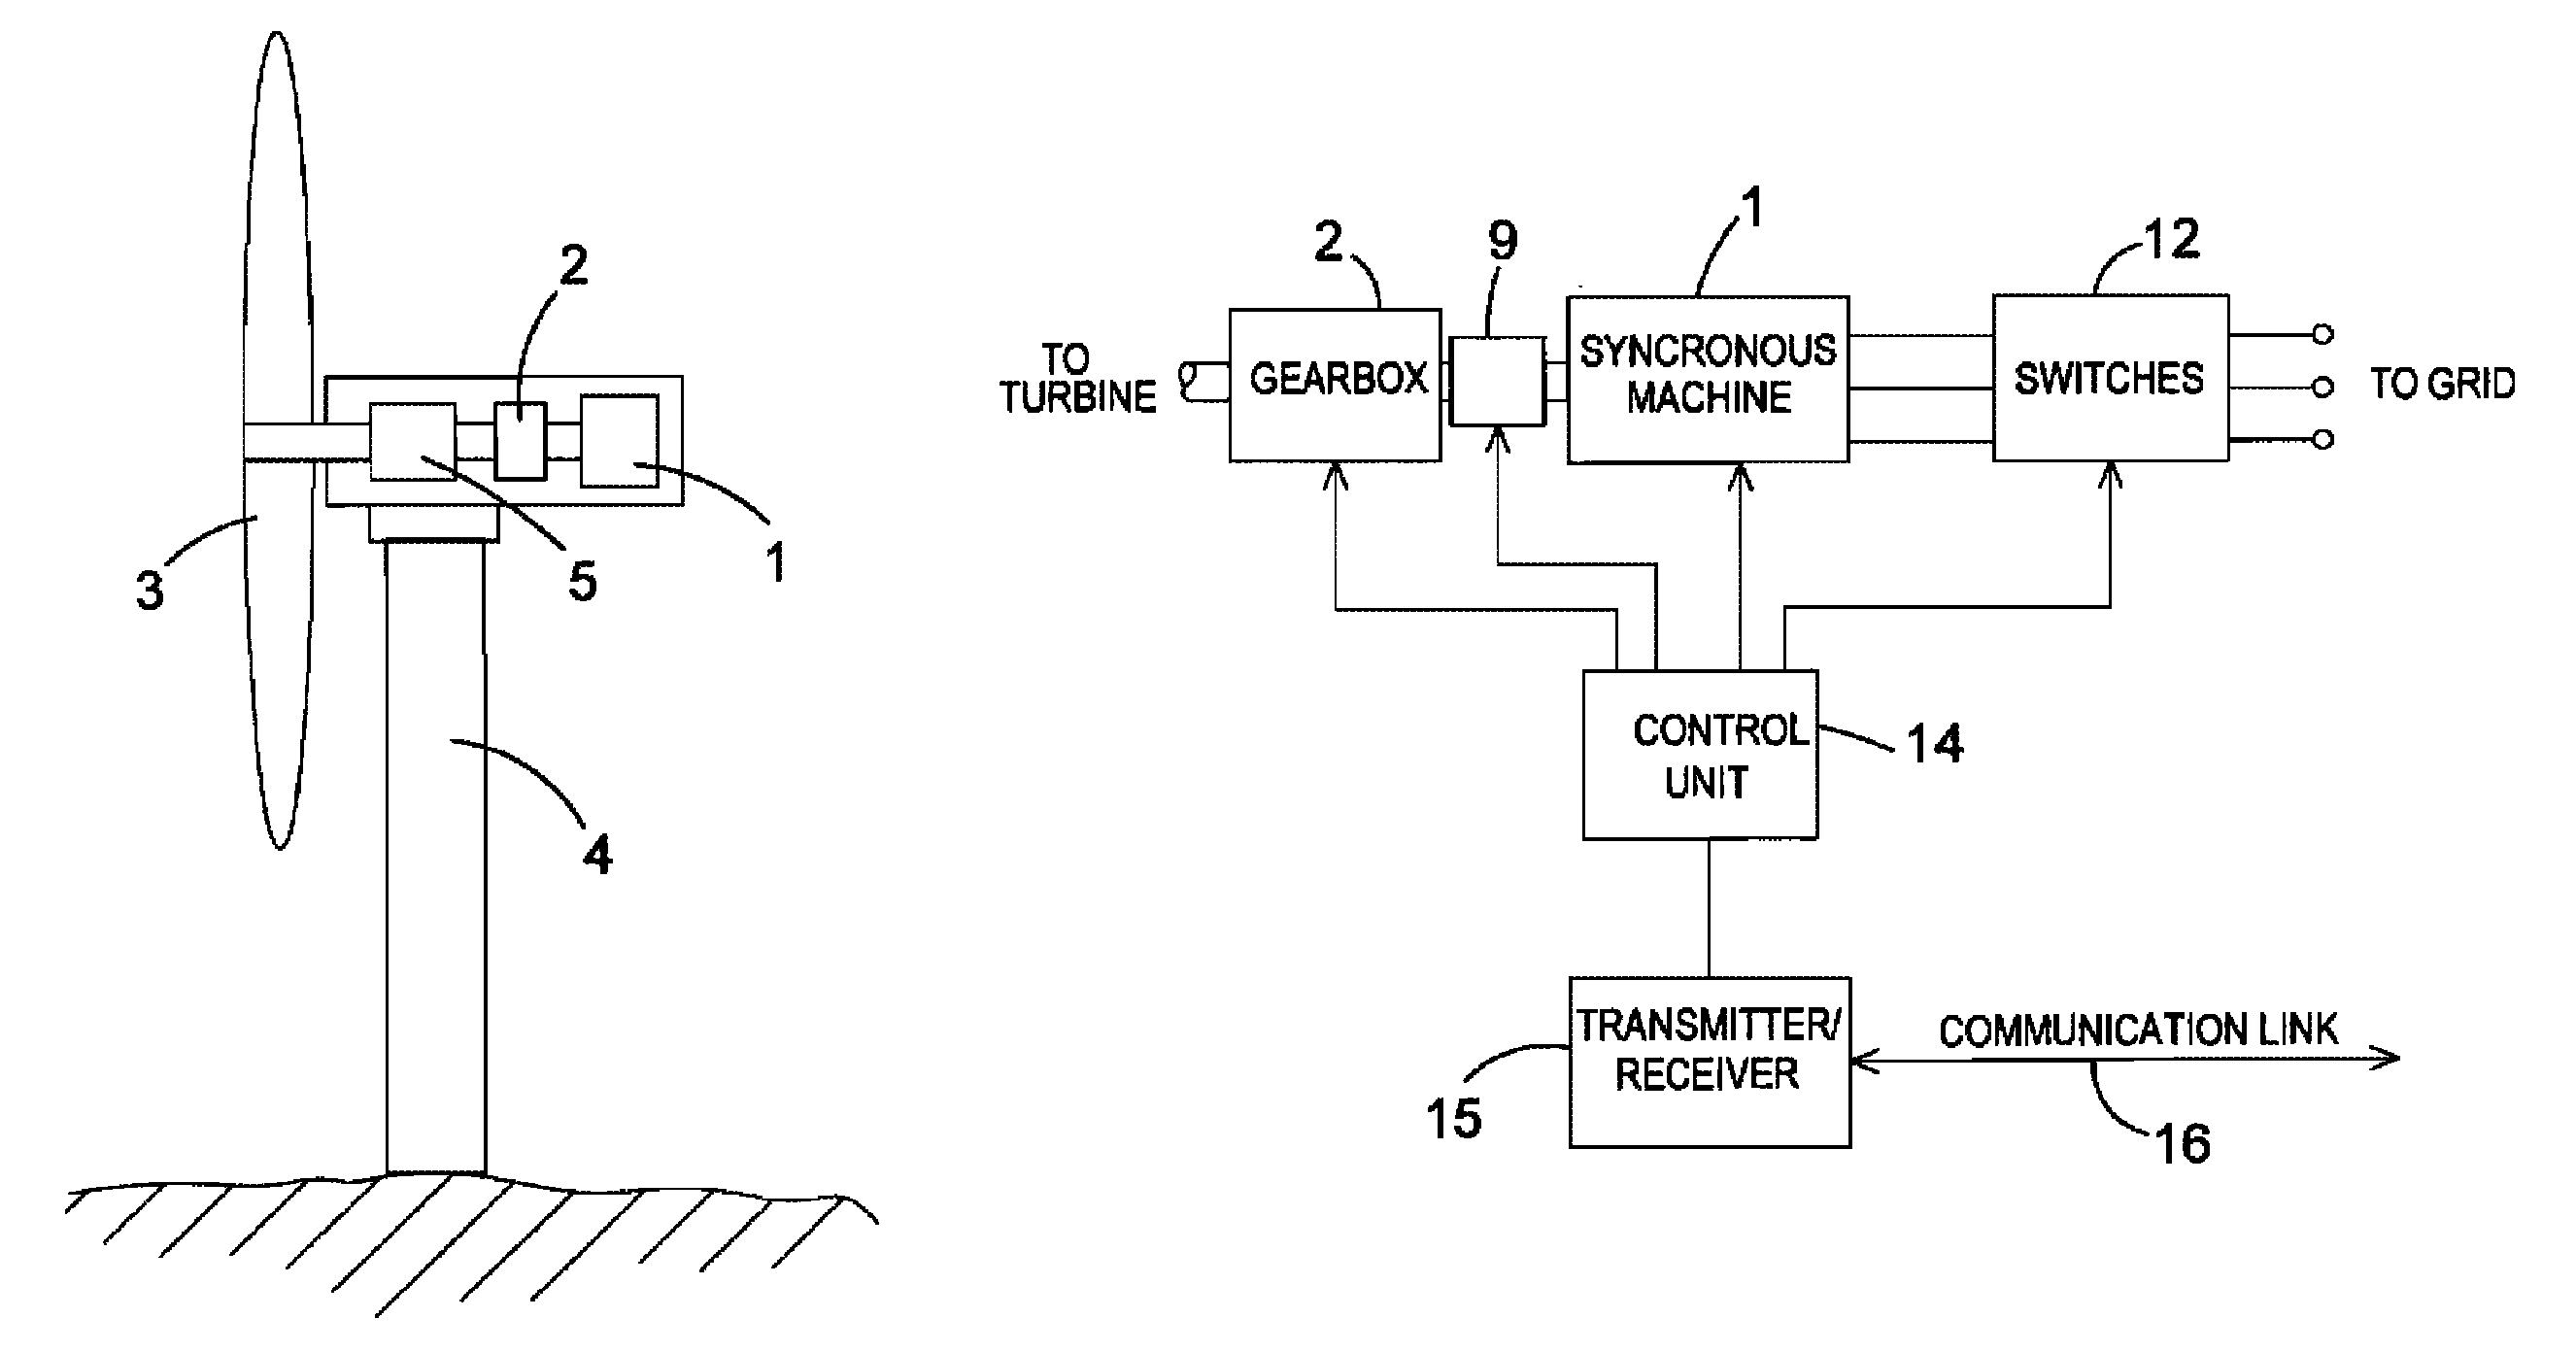 Power generation system, wind turbine, and a method of controlling the wind turbine for supplying power to an electrical grid